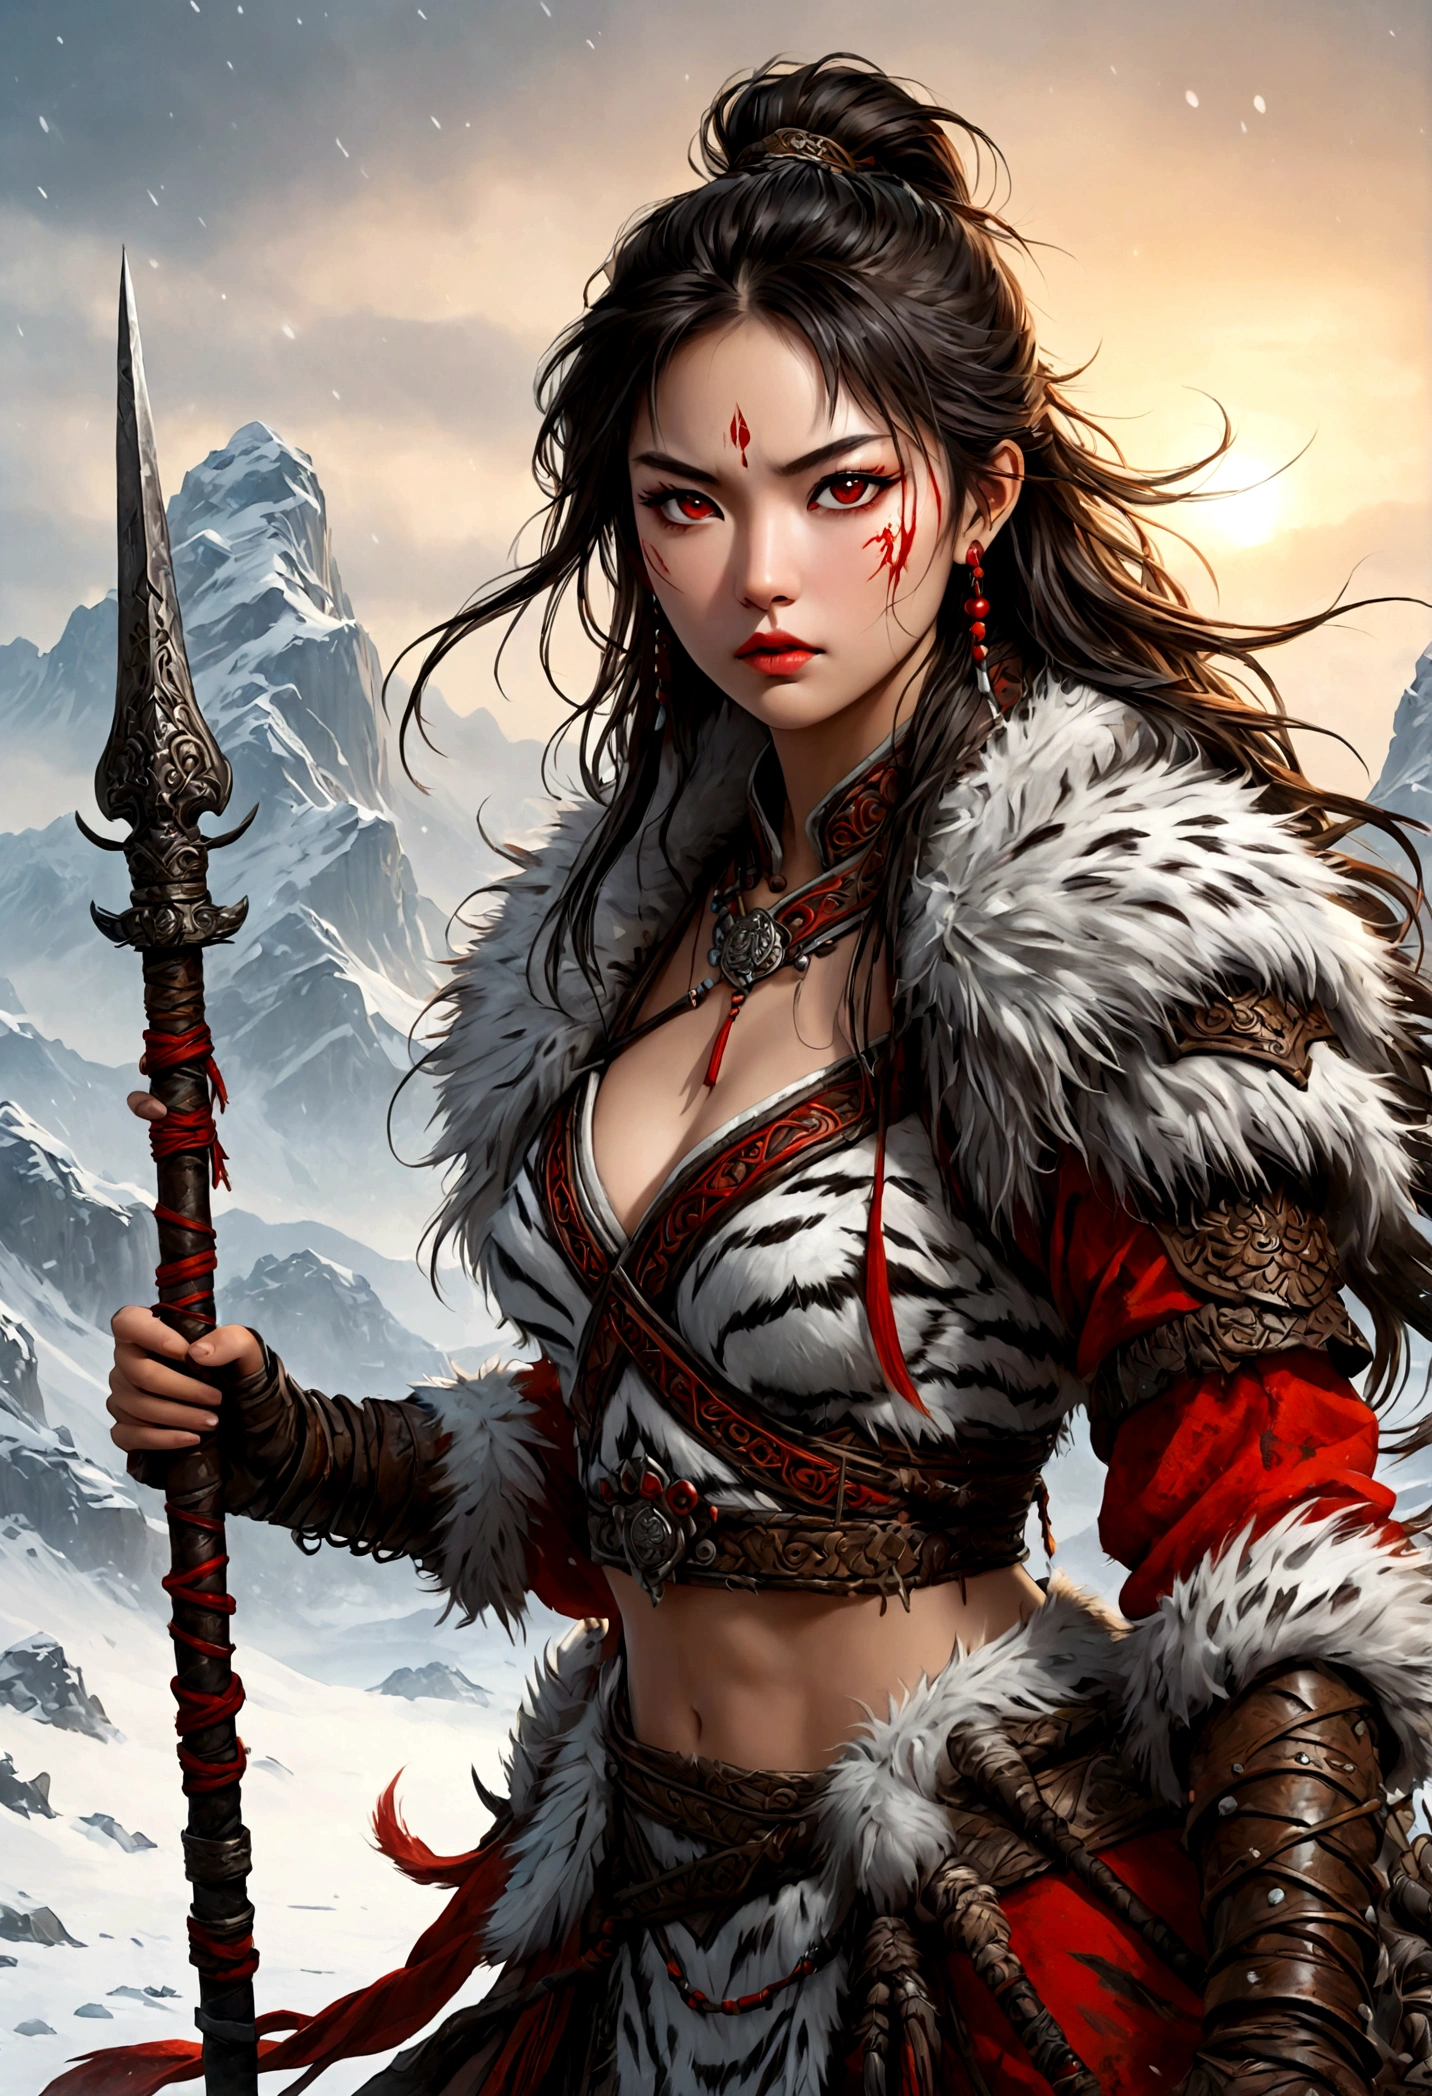 (best quality,4k,8K,high resolution,masterpiece:1.2),Very detailed,(actual,photoactual,photo-actual:1.37),Thick fur winter coat,Creative fusion of traditional Chinese design patterns and contemporary elements, High Ponytail，There is blood on the face，Red paint， Strong expression, Full of energy, Sharp eyes, 1 warrior, Handsome face, Tiger beast, Epic Fantasy Character Art, wearing intricate fur armor, Luis Royo (Luis Royo) style, Northern female warrior holding a spear, HDR, Ultra high quality, Studio Lighting, Ultra-fine, Be focused, Physically Based Rendering, Very detailed的描述, professional, Vibrant colors, Bokeh, portrait, landscape